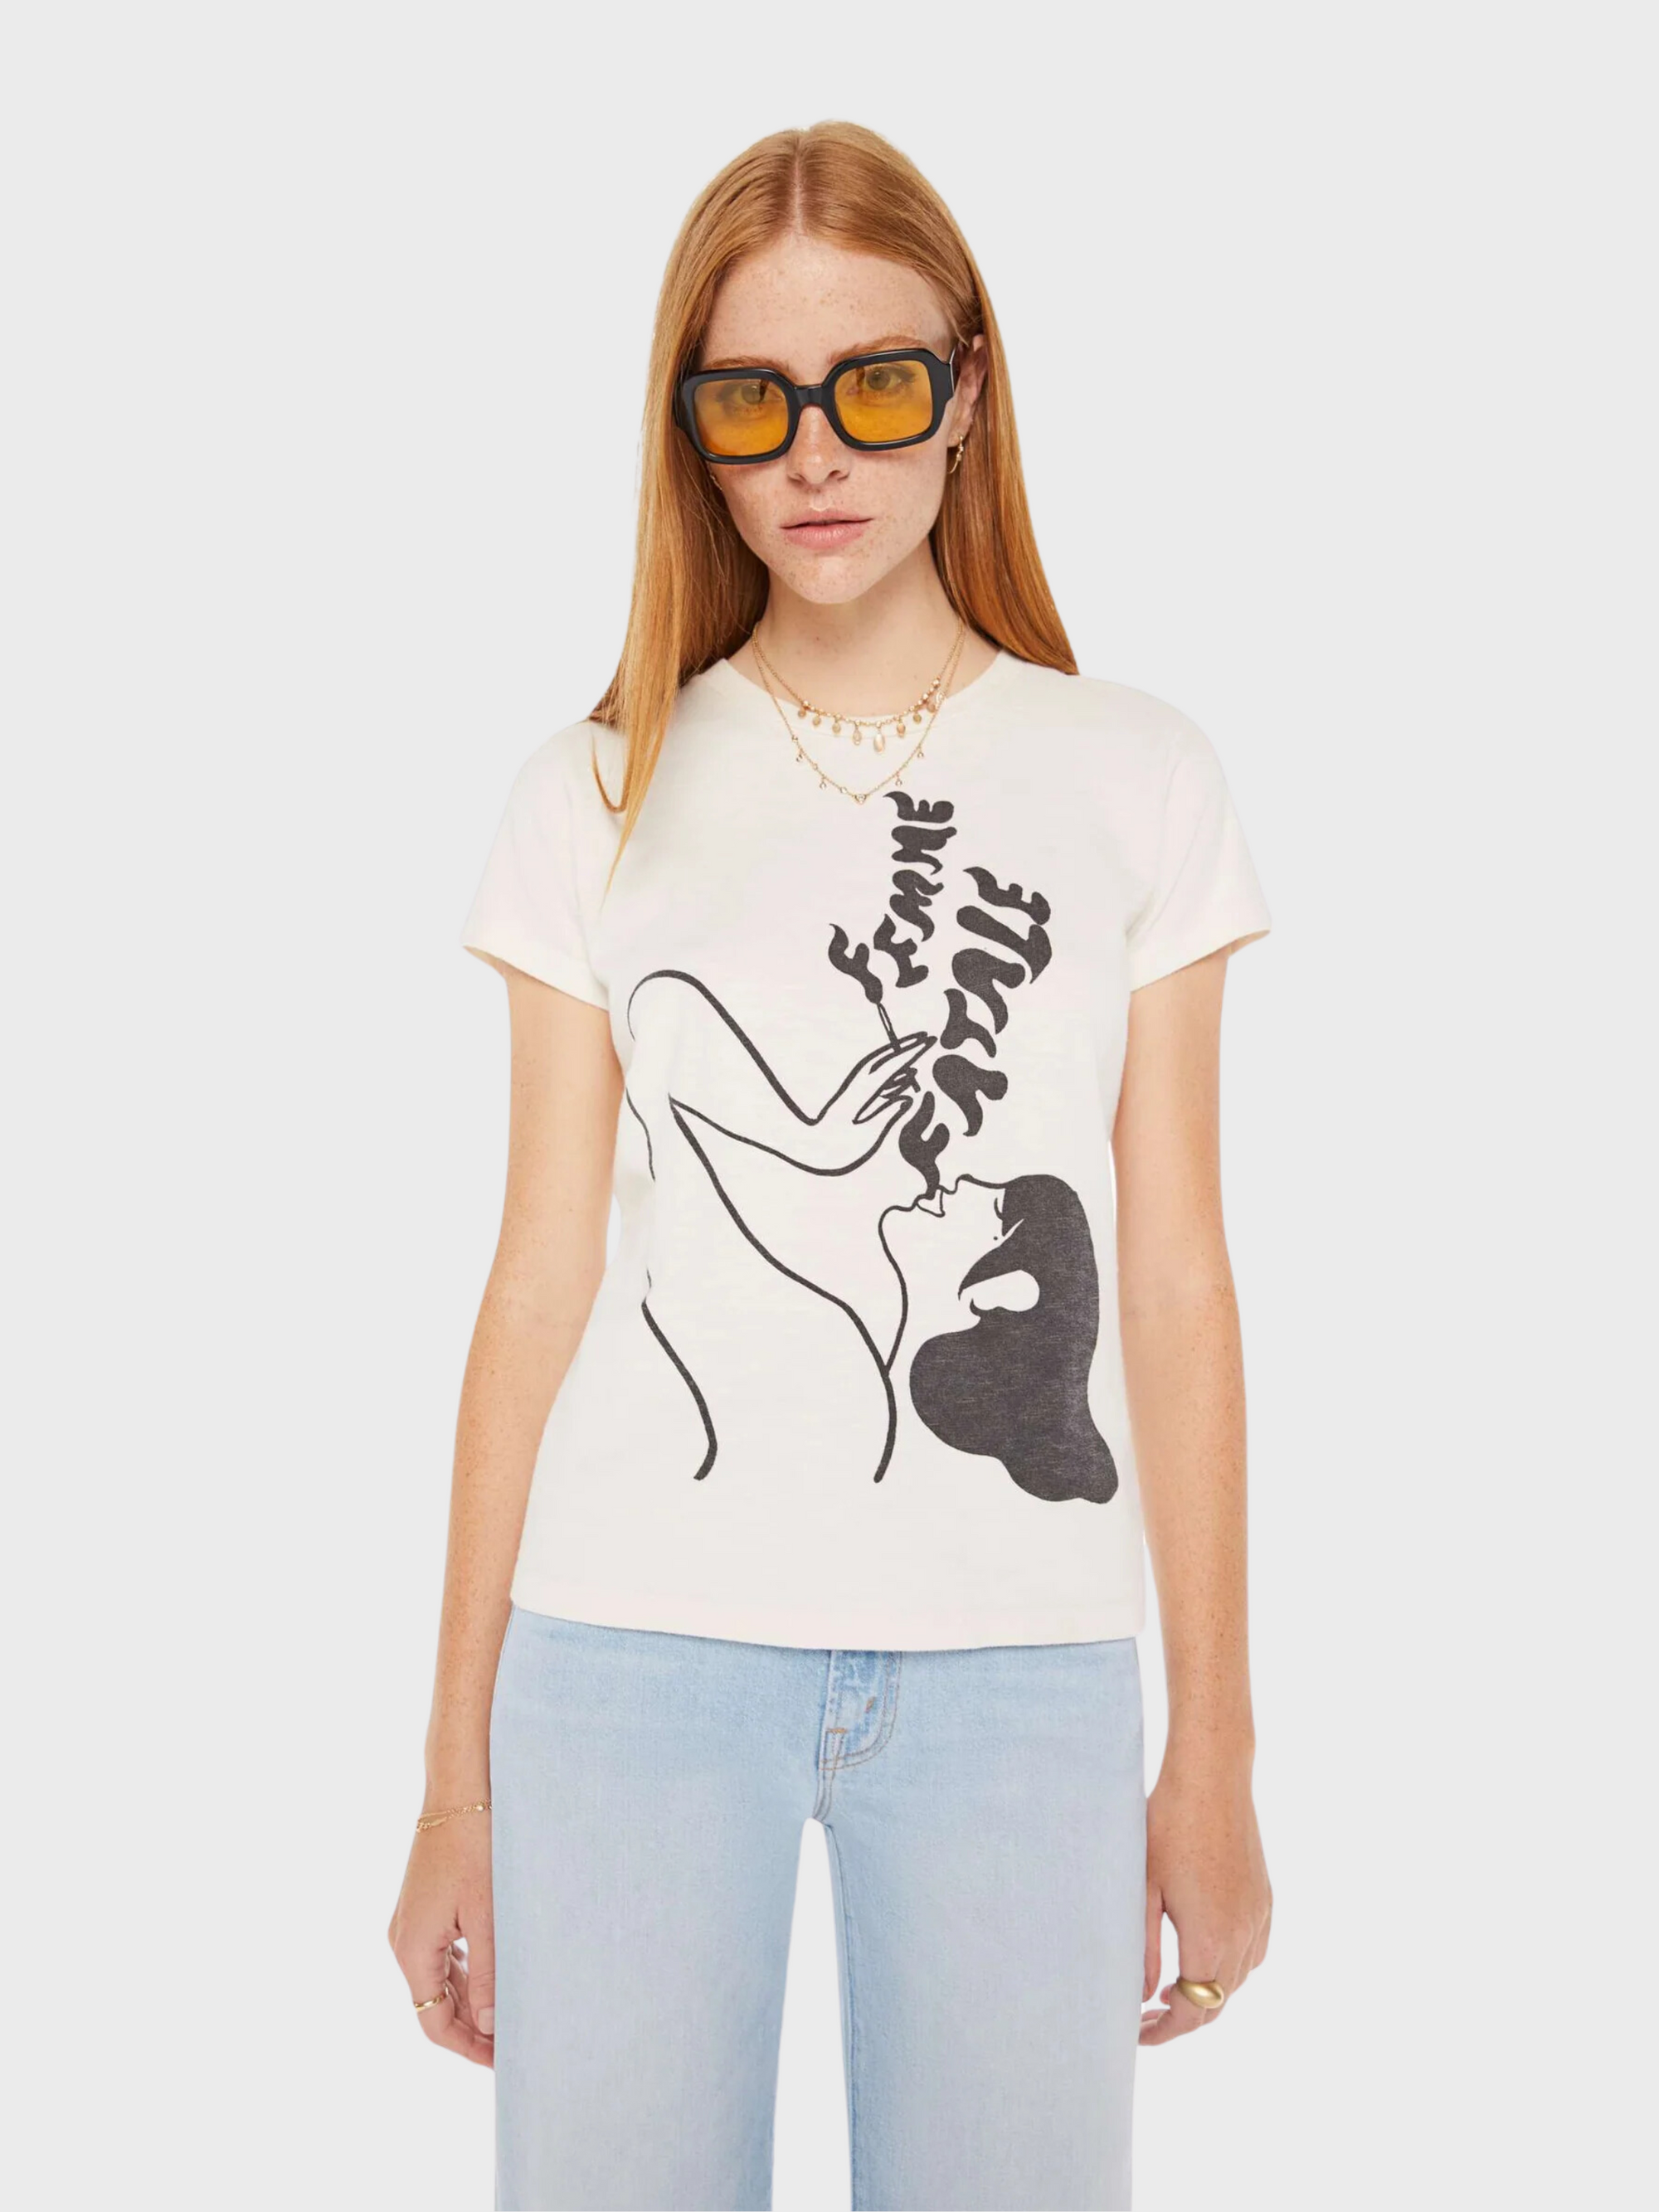 MOTHER Sinful Tee Femme Fatale-T-Shirts-XS-West of Woodward Boutique-Vancouver-Canada